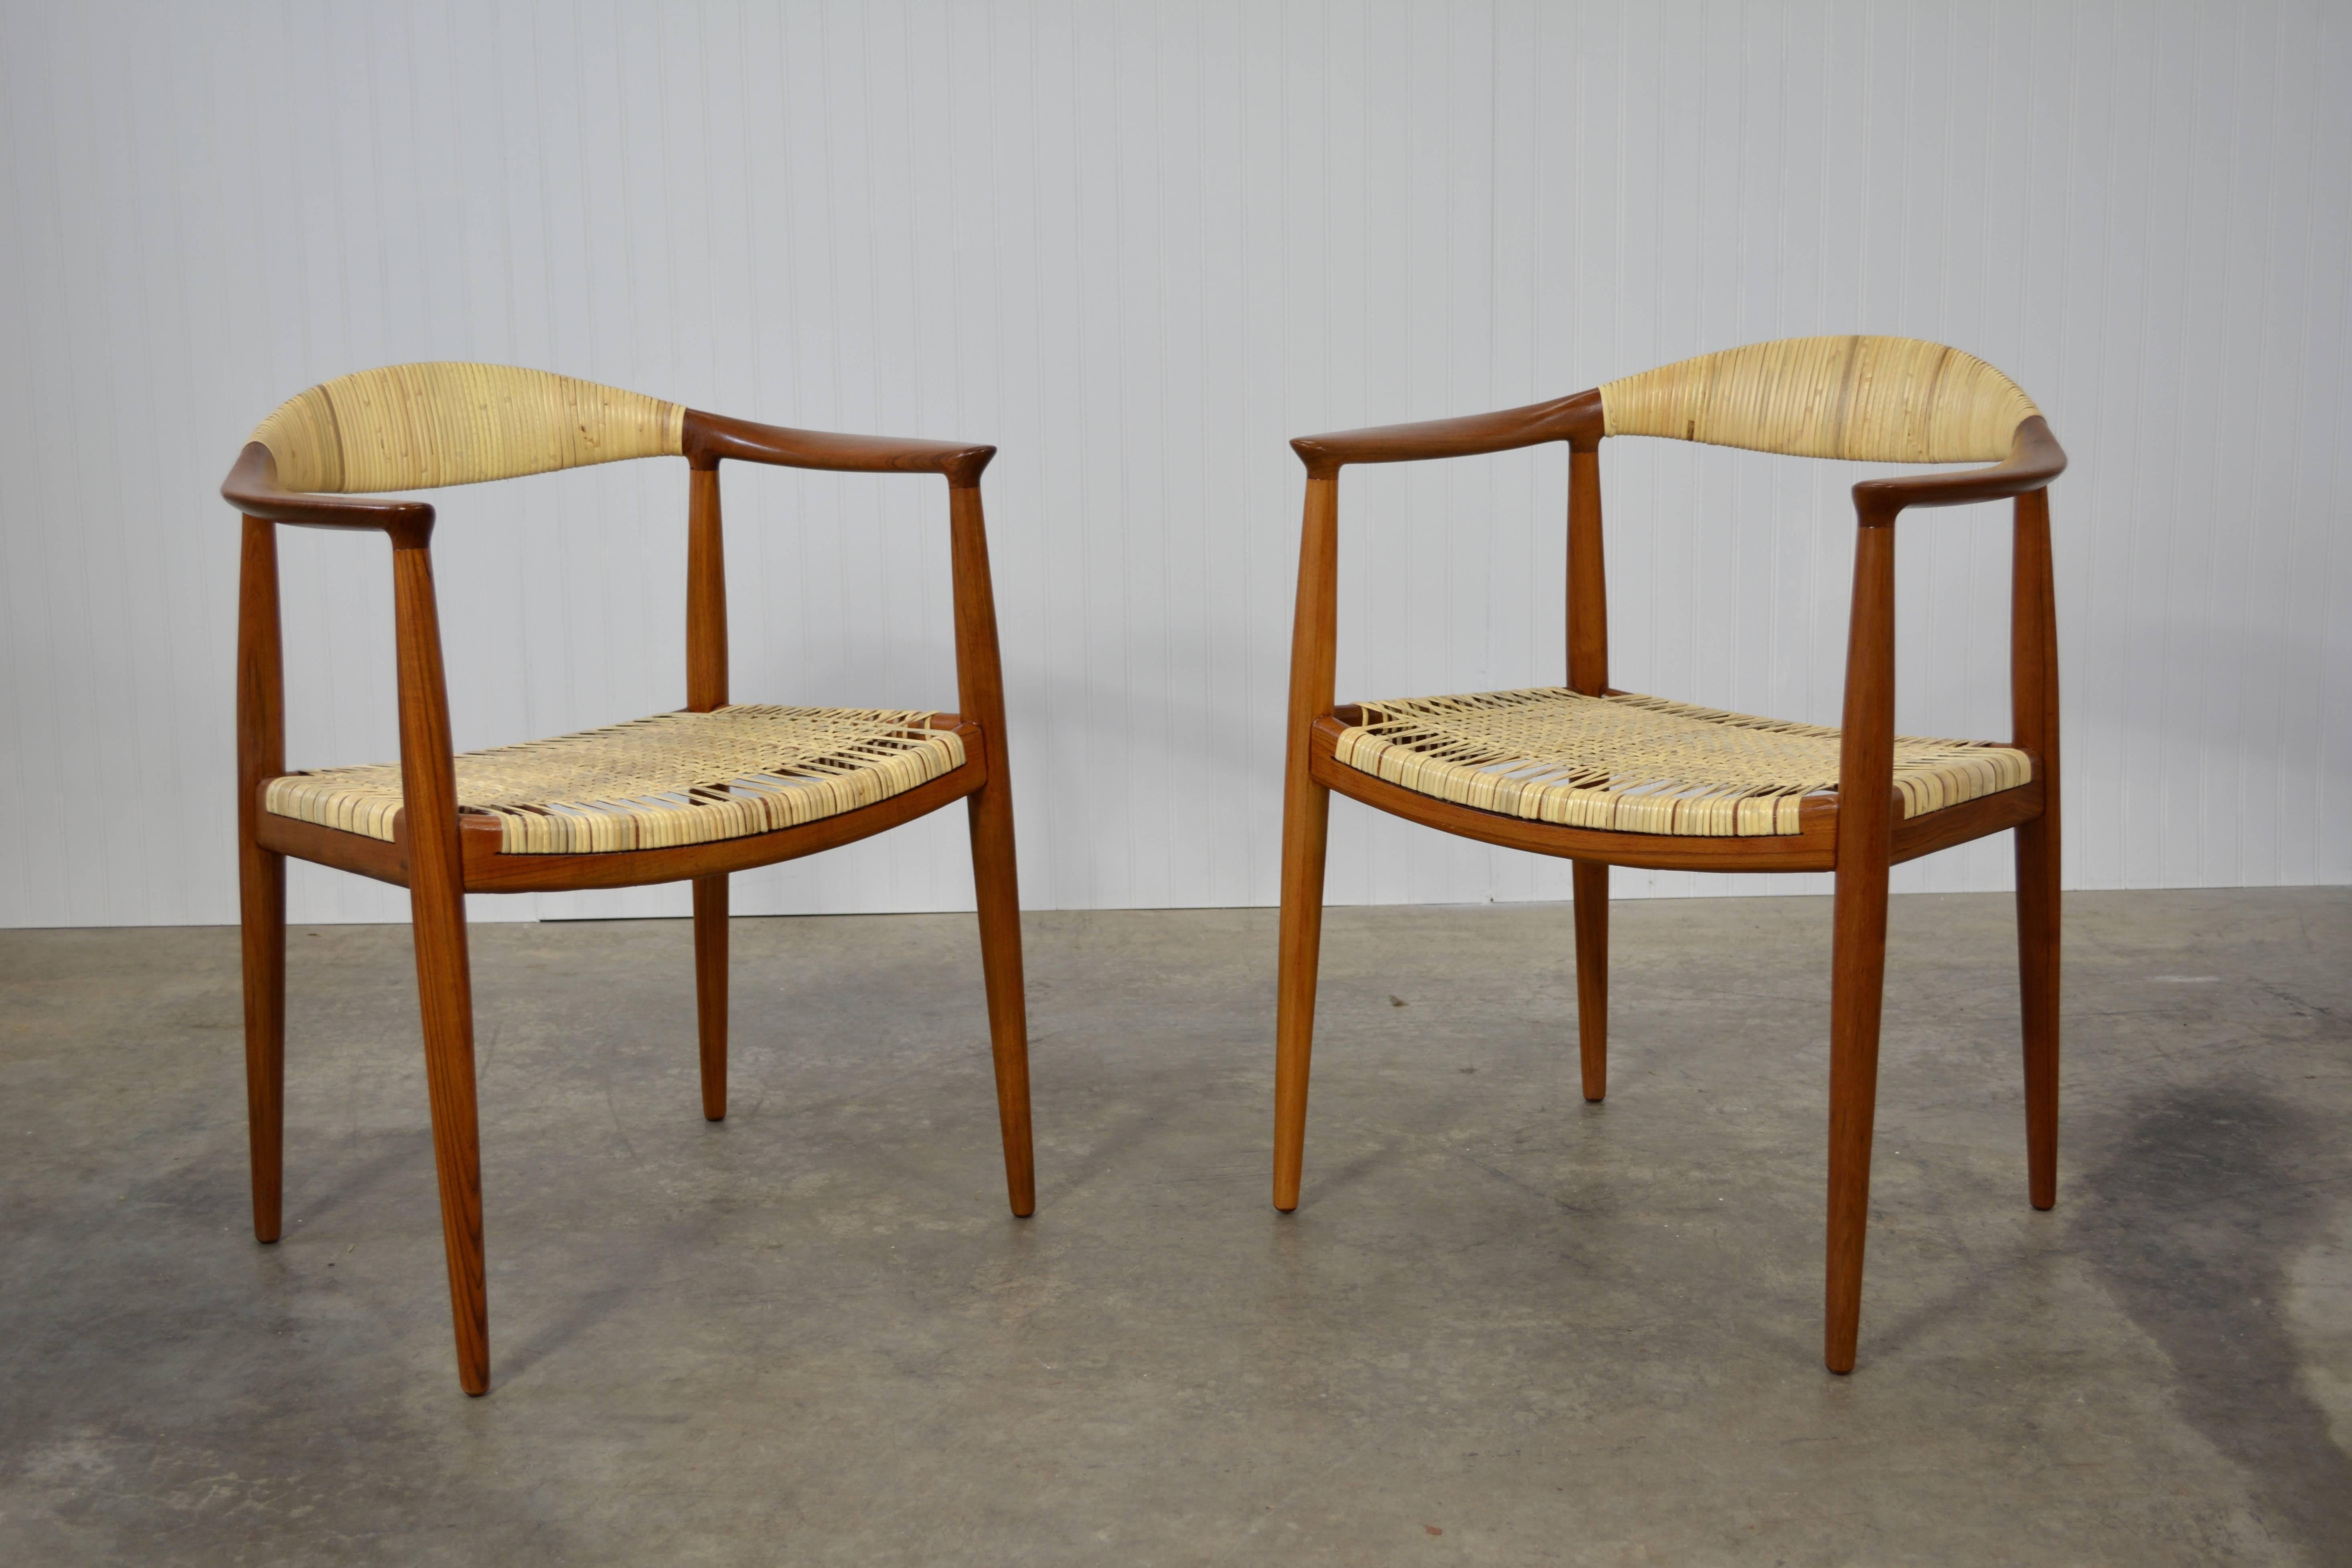 Pair of round chairs designed by Hans Wegner for Johannes Hansen. Solid teak frames with new caning on the seats on back. Both chairs stamped.